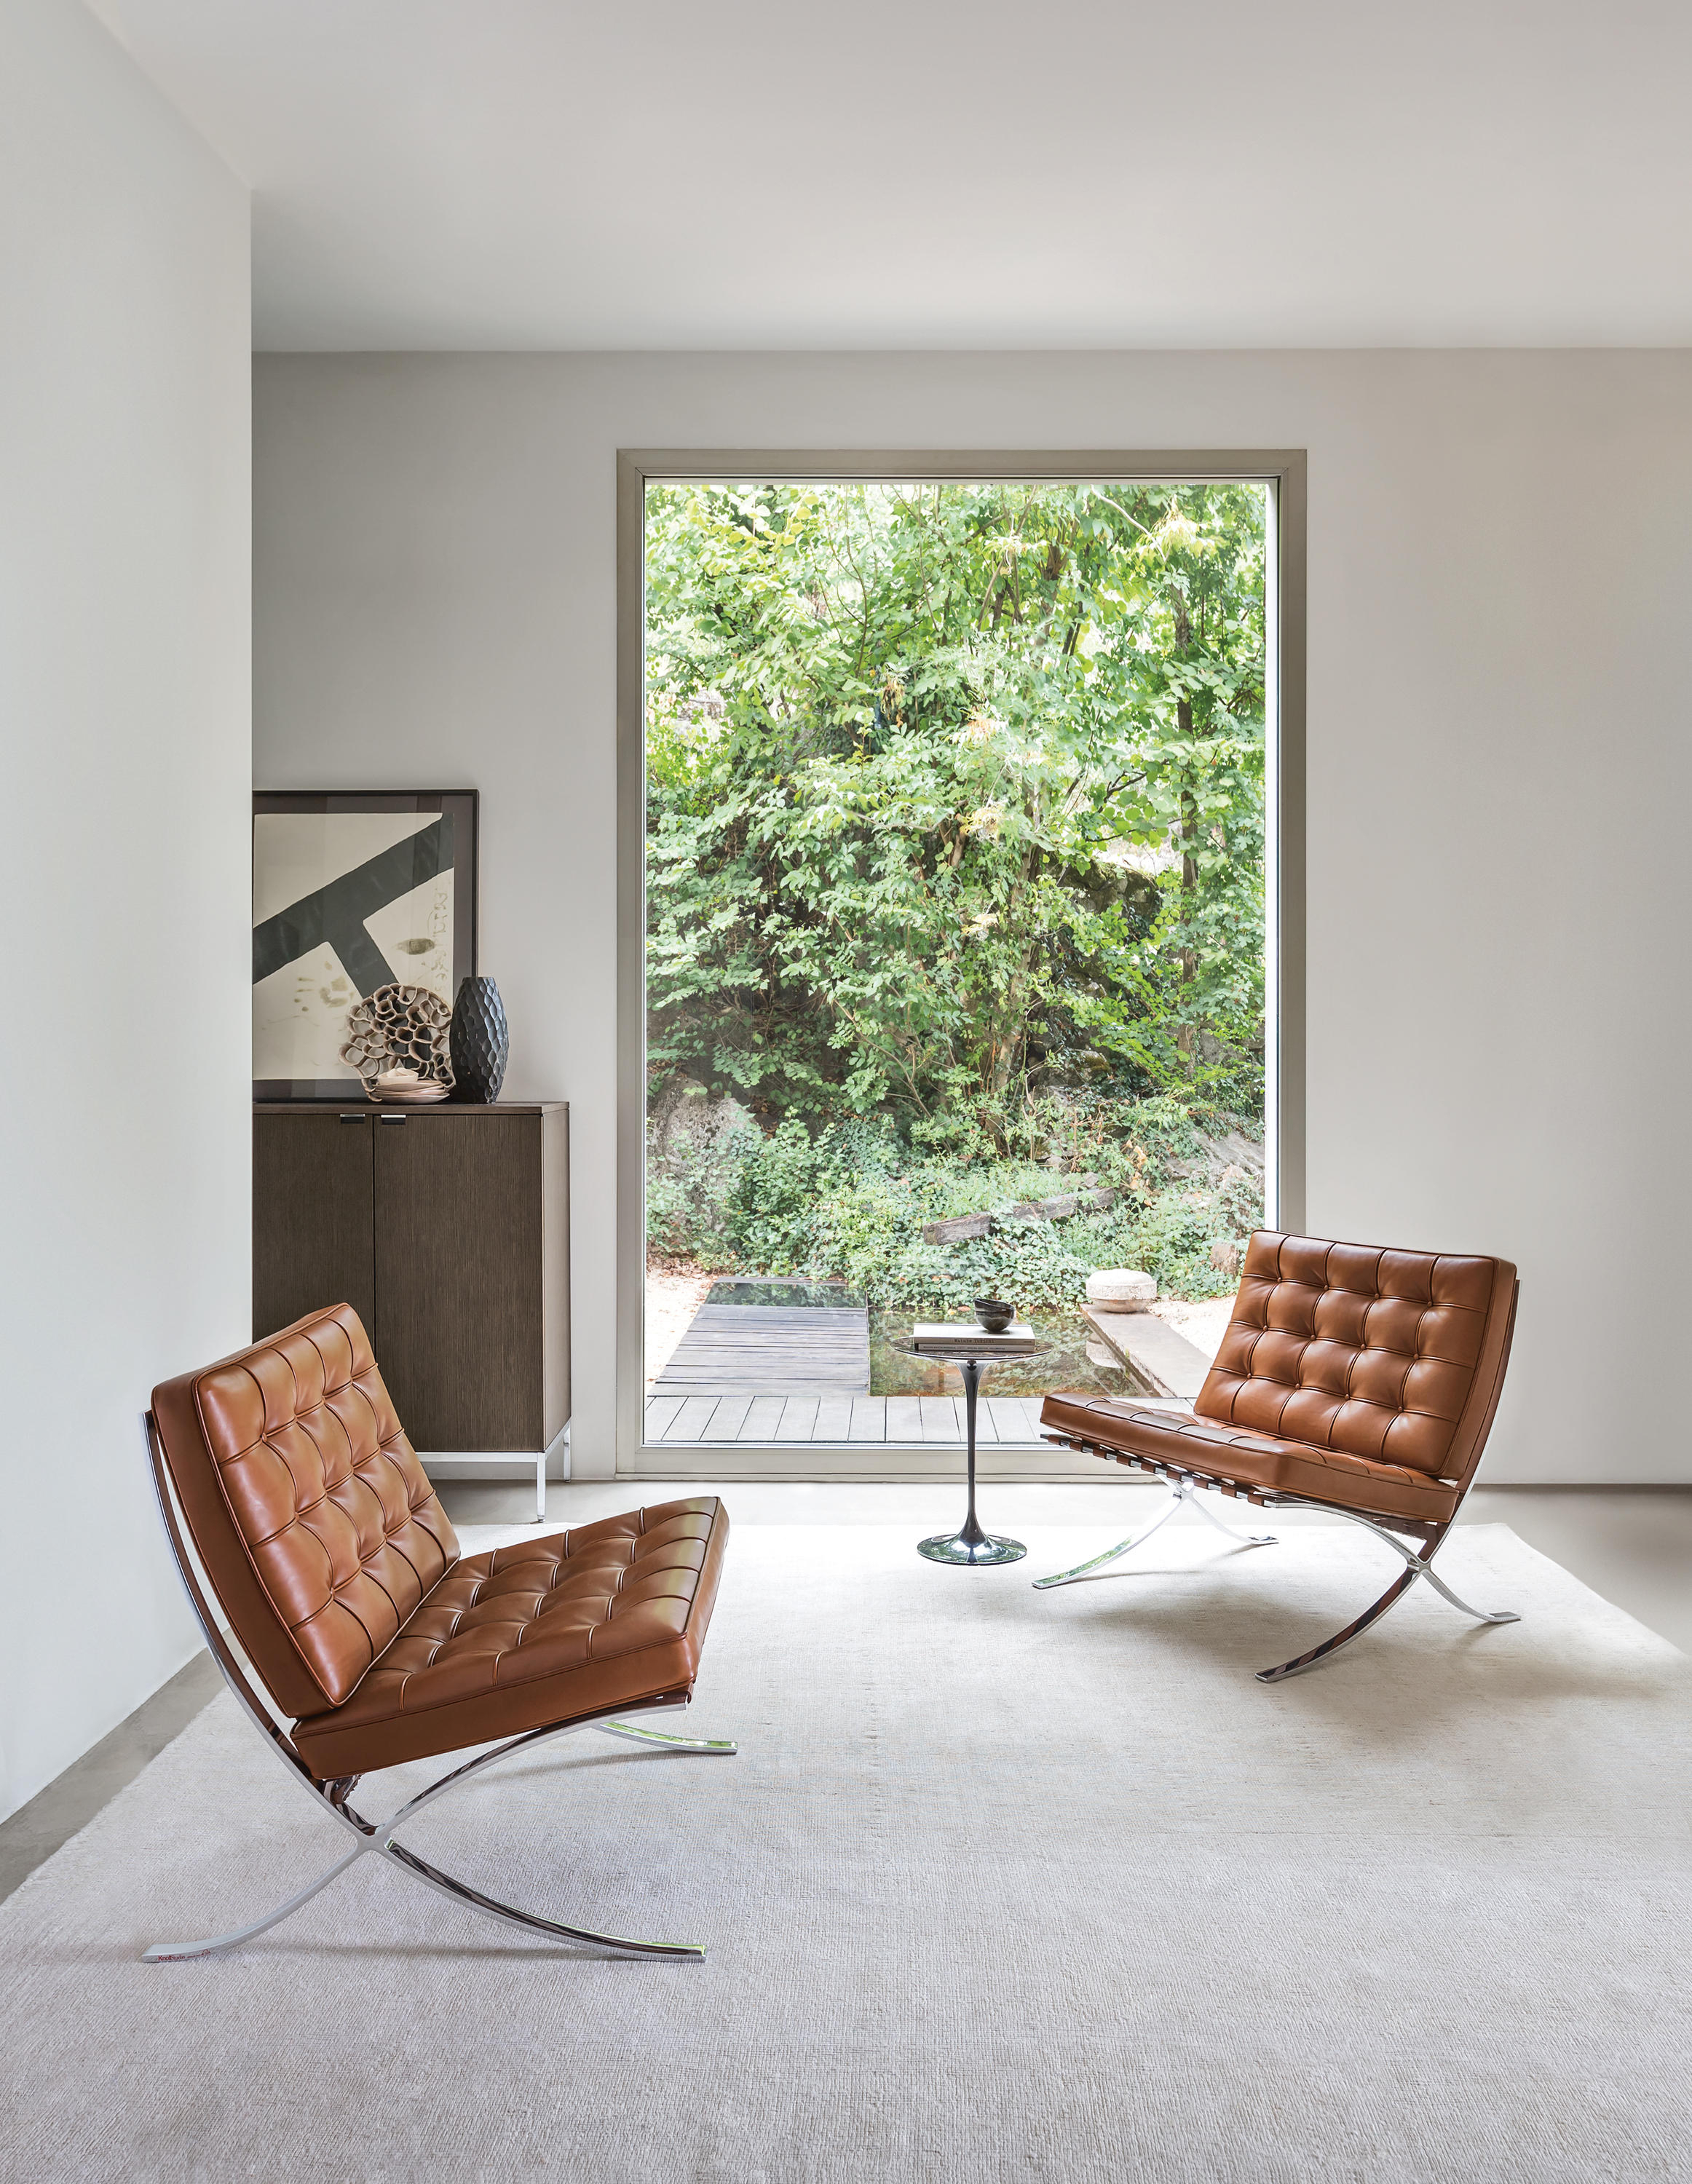 Barcelona Chair Replacement Cushions, Mies van der Rohe